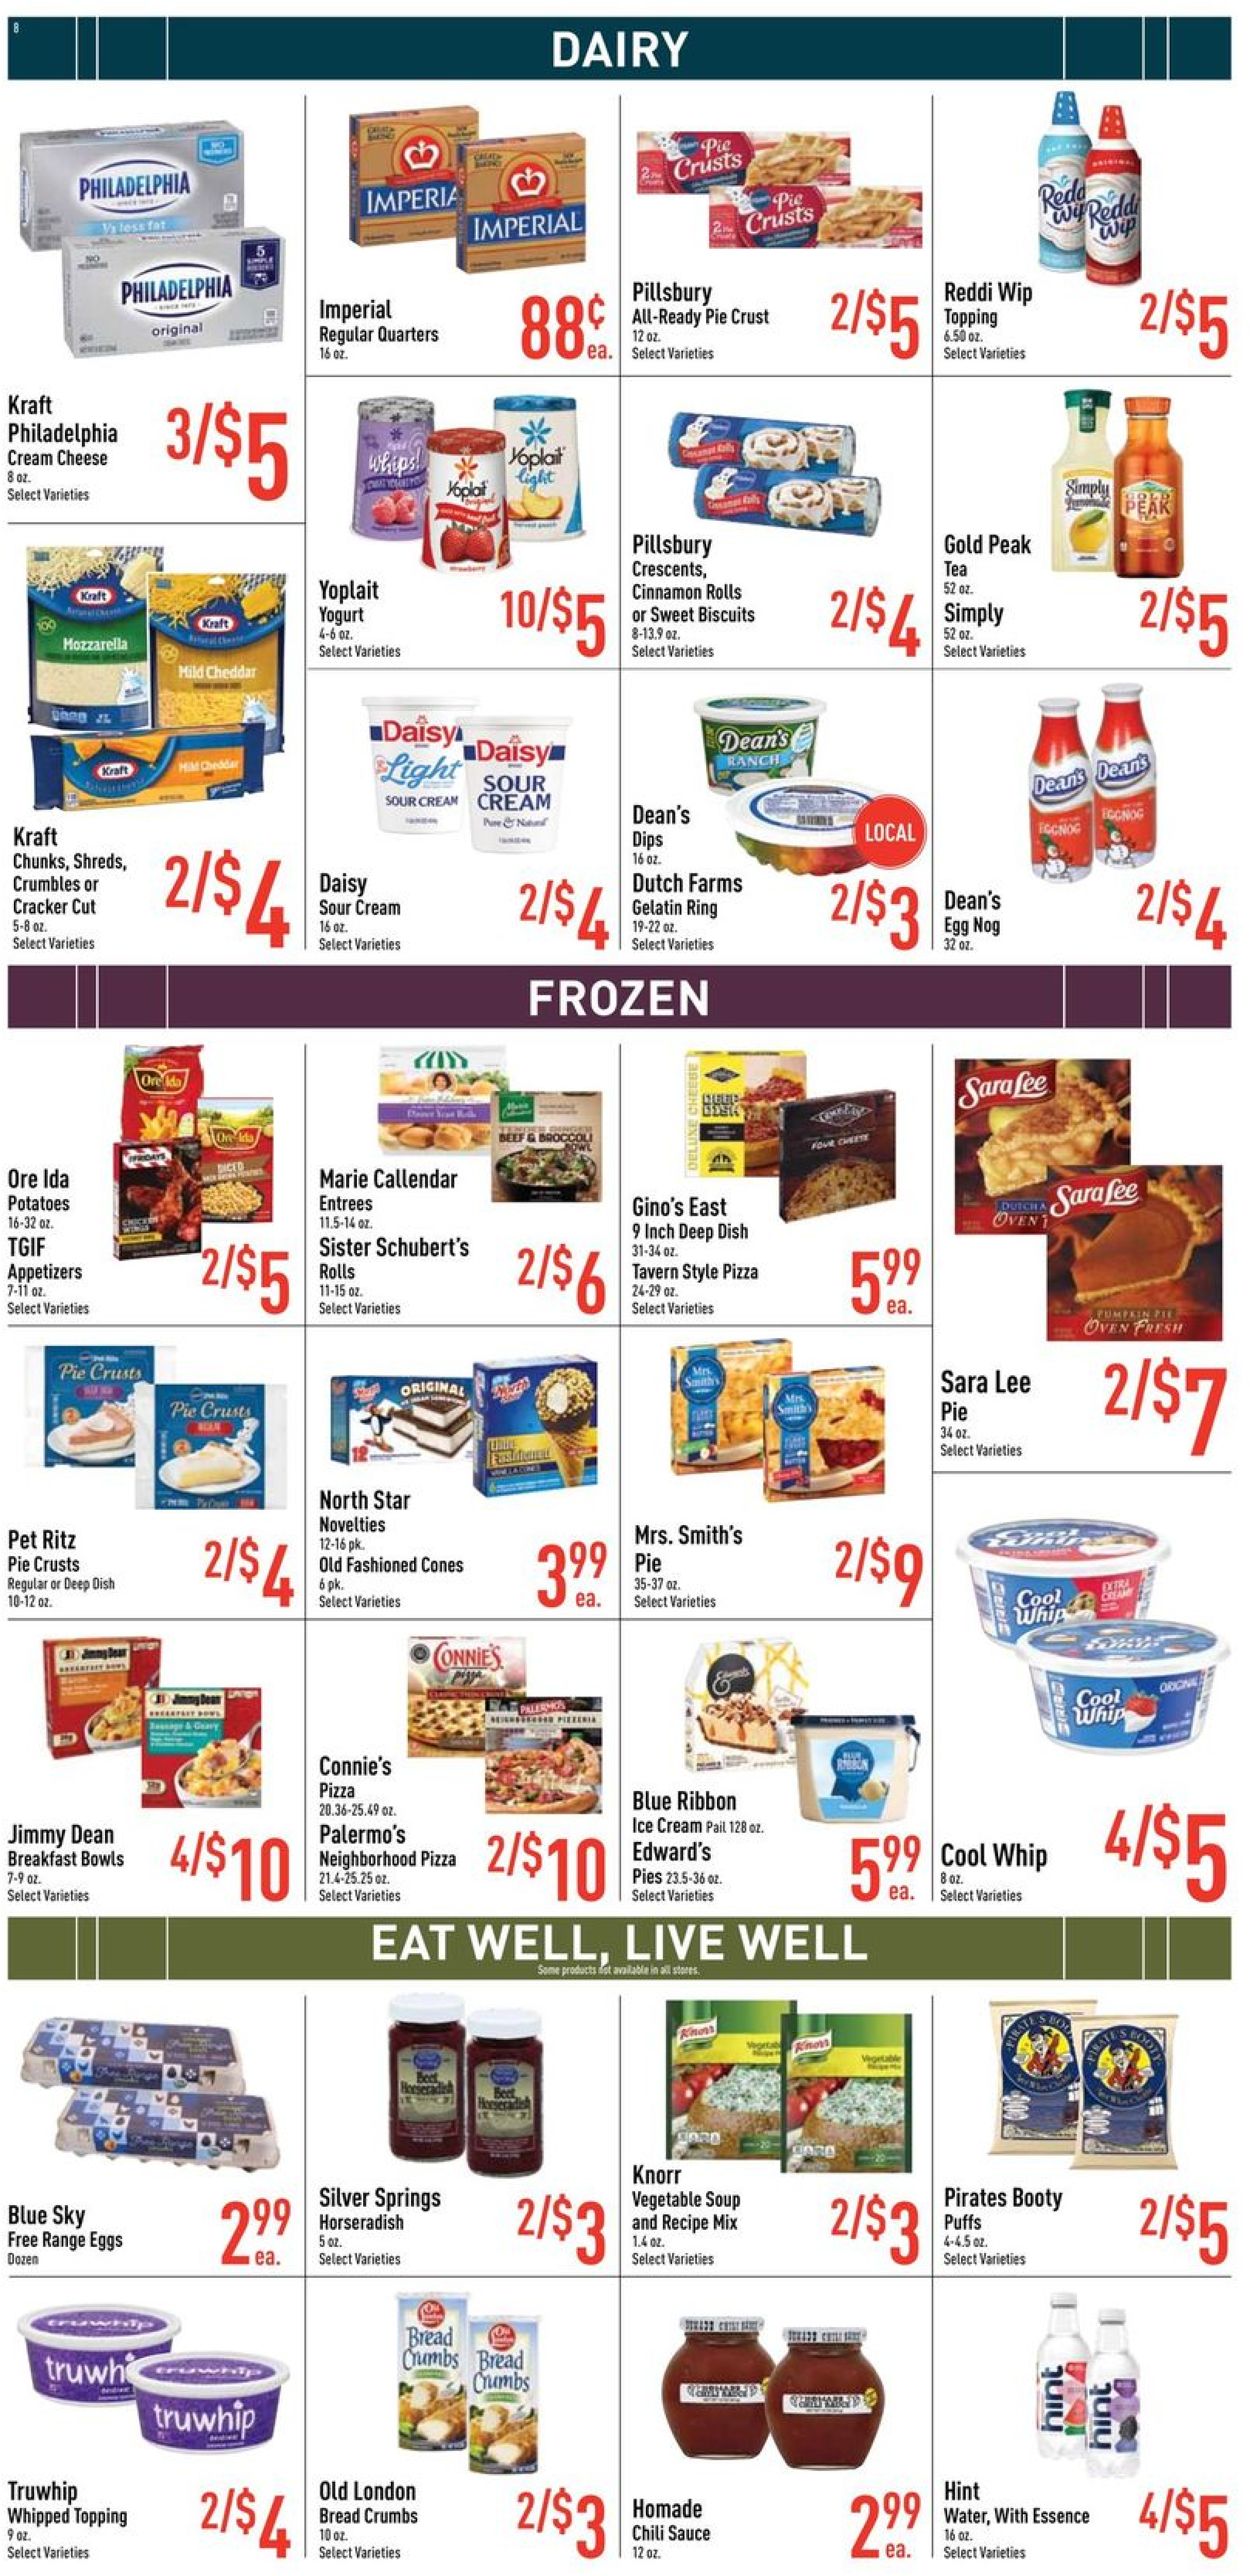 Catalogue Strack & Van Til Thanksgiving ad 2020 from 11/18/2020